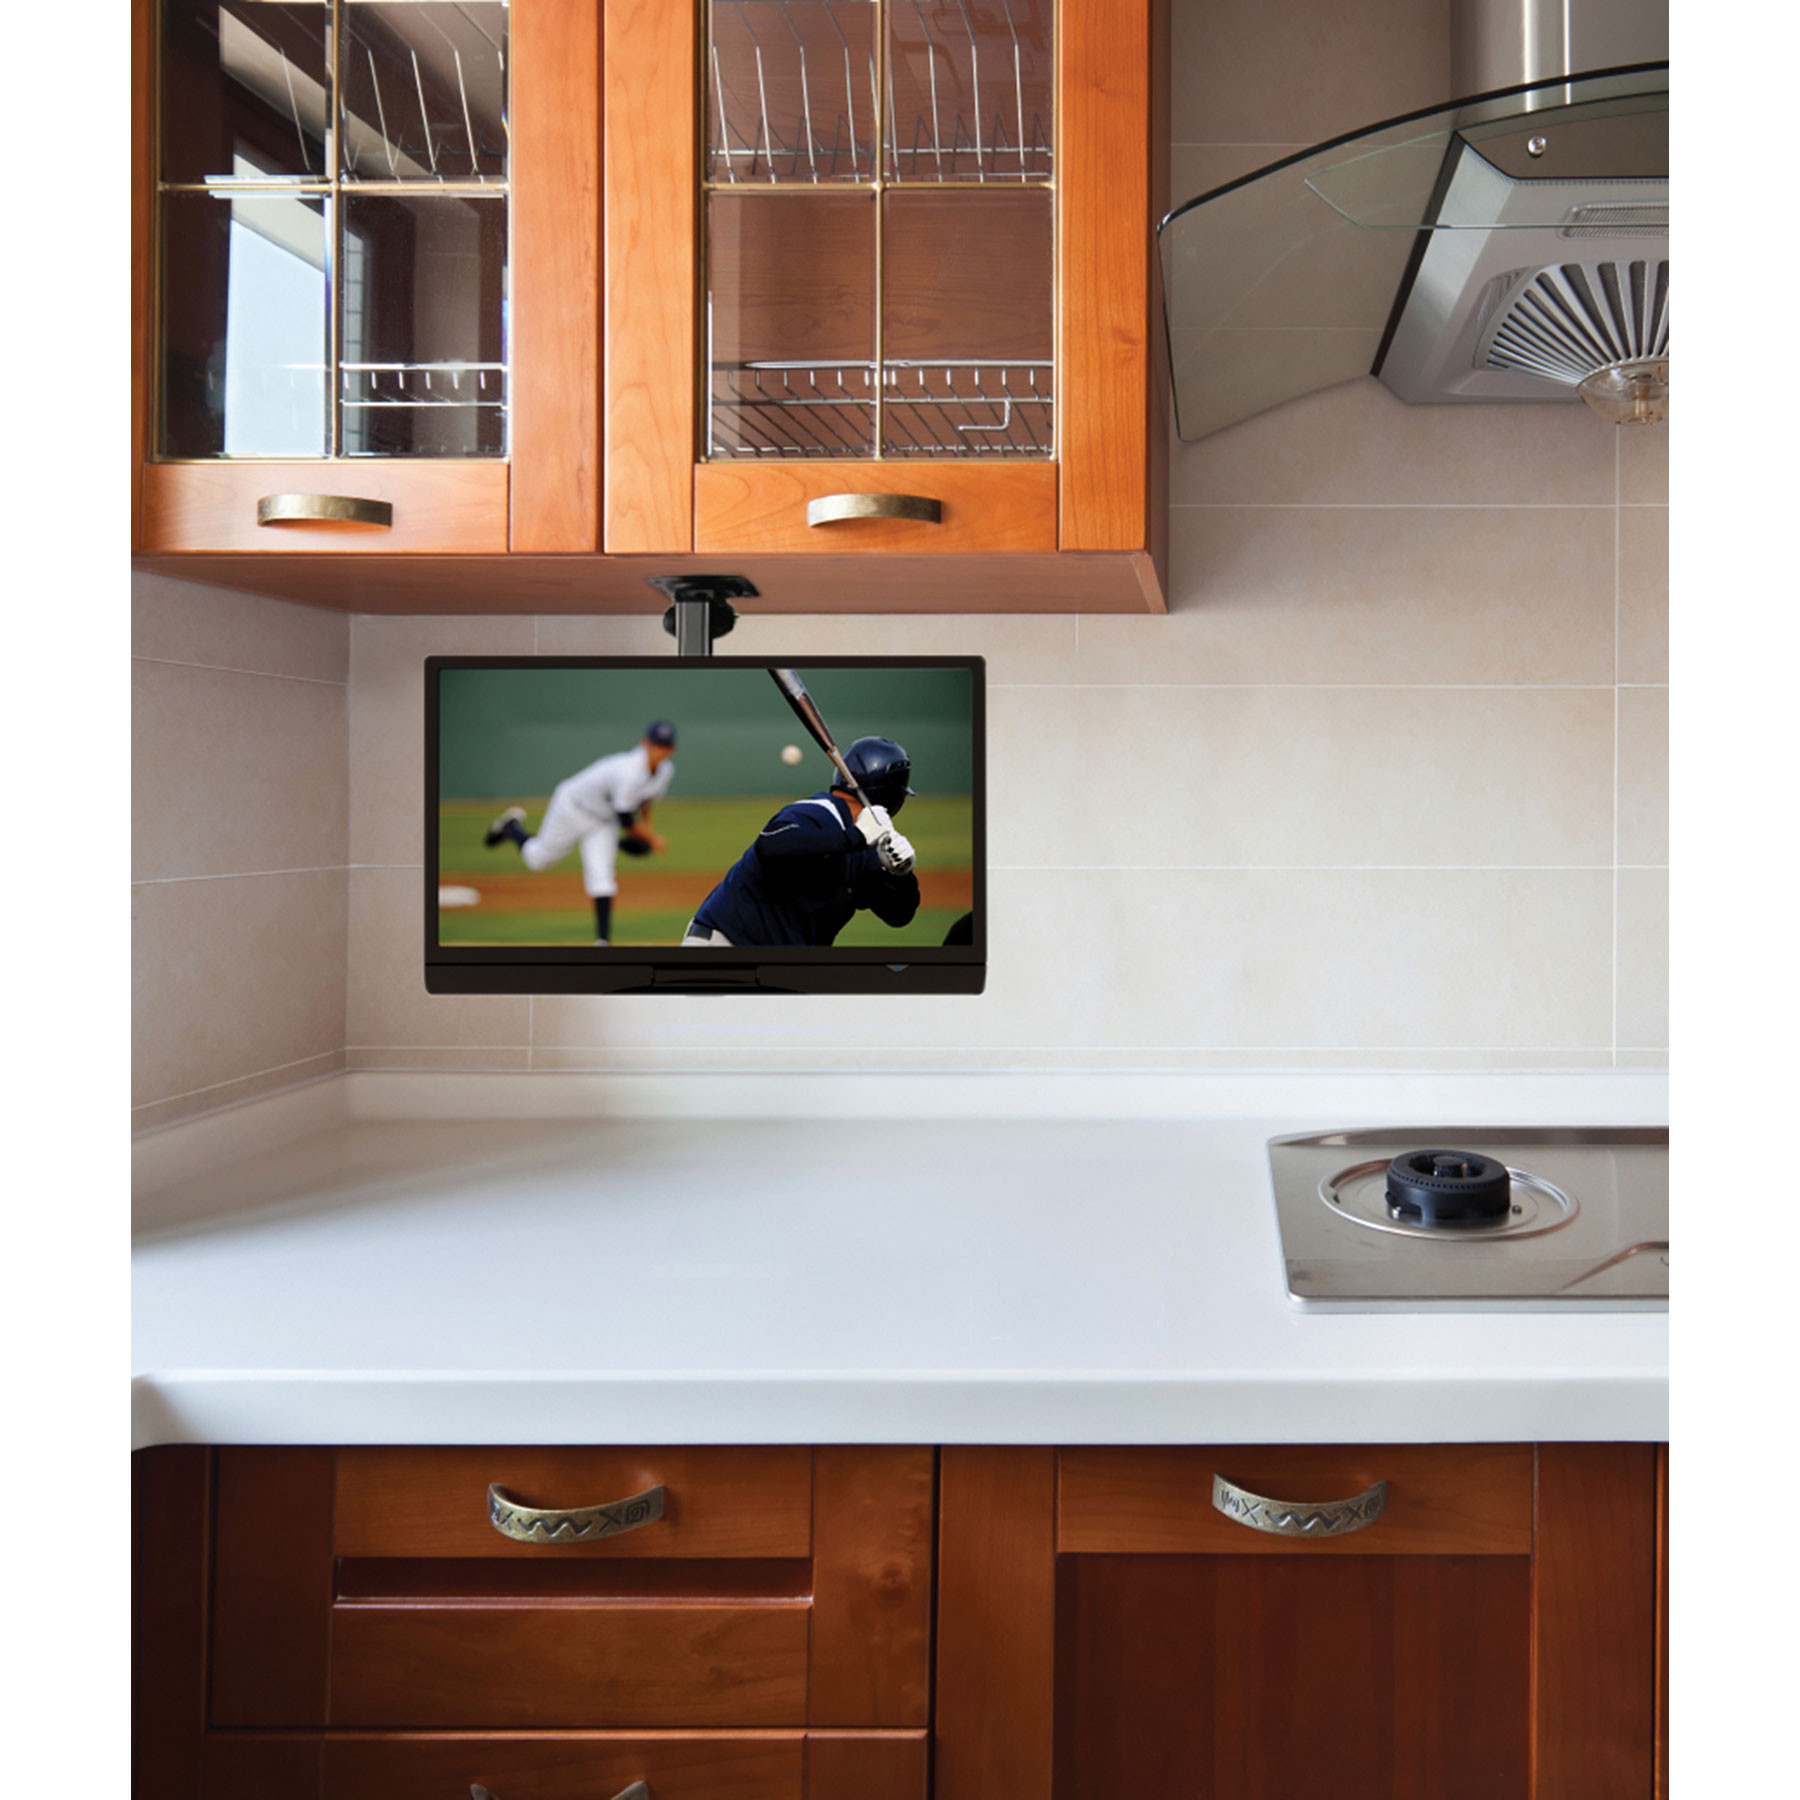 Kitchen Televisions Under Cabinet
 Parts Express Folding LCD TV Mount